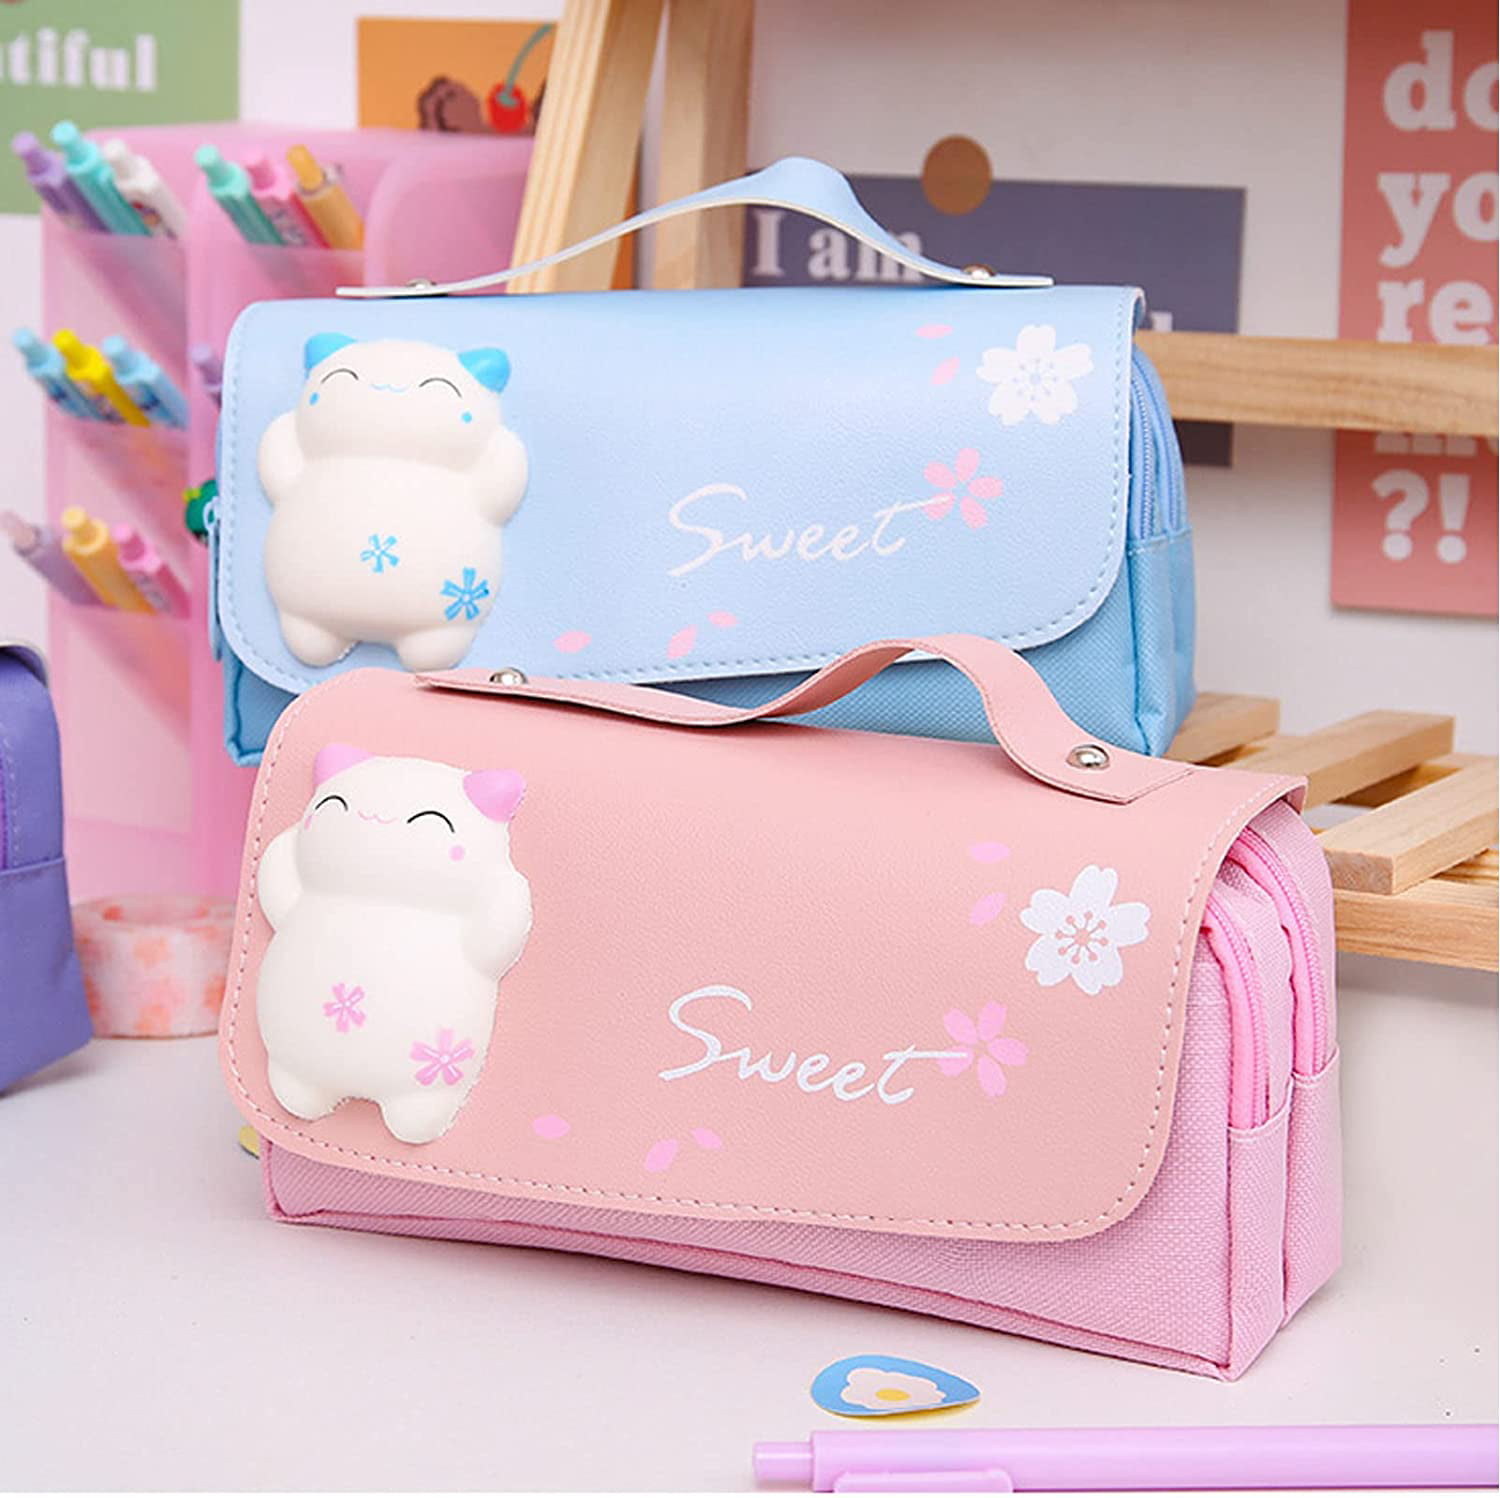 Kawaii Pencil Case Cute Cartoon Bendy Pencilcase Pen Holder Bag for  Students Double Zipper Large Capacity Leather Cosmetic Bags - Price history  & Review, AliExpress Seller - Sunny Craft